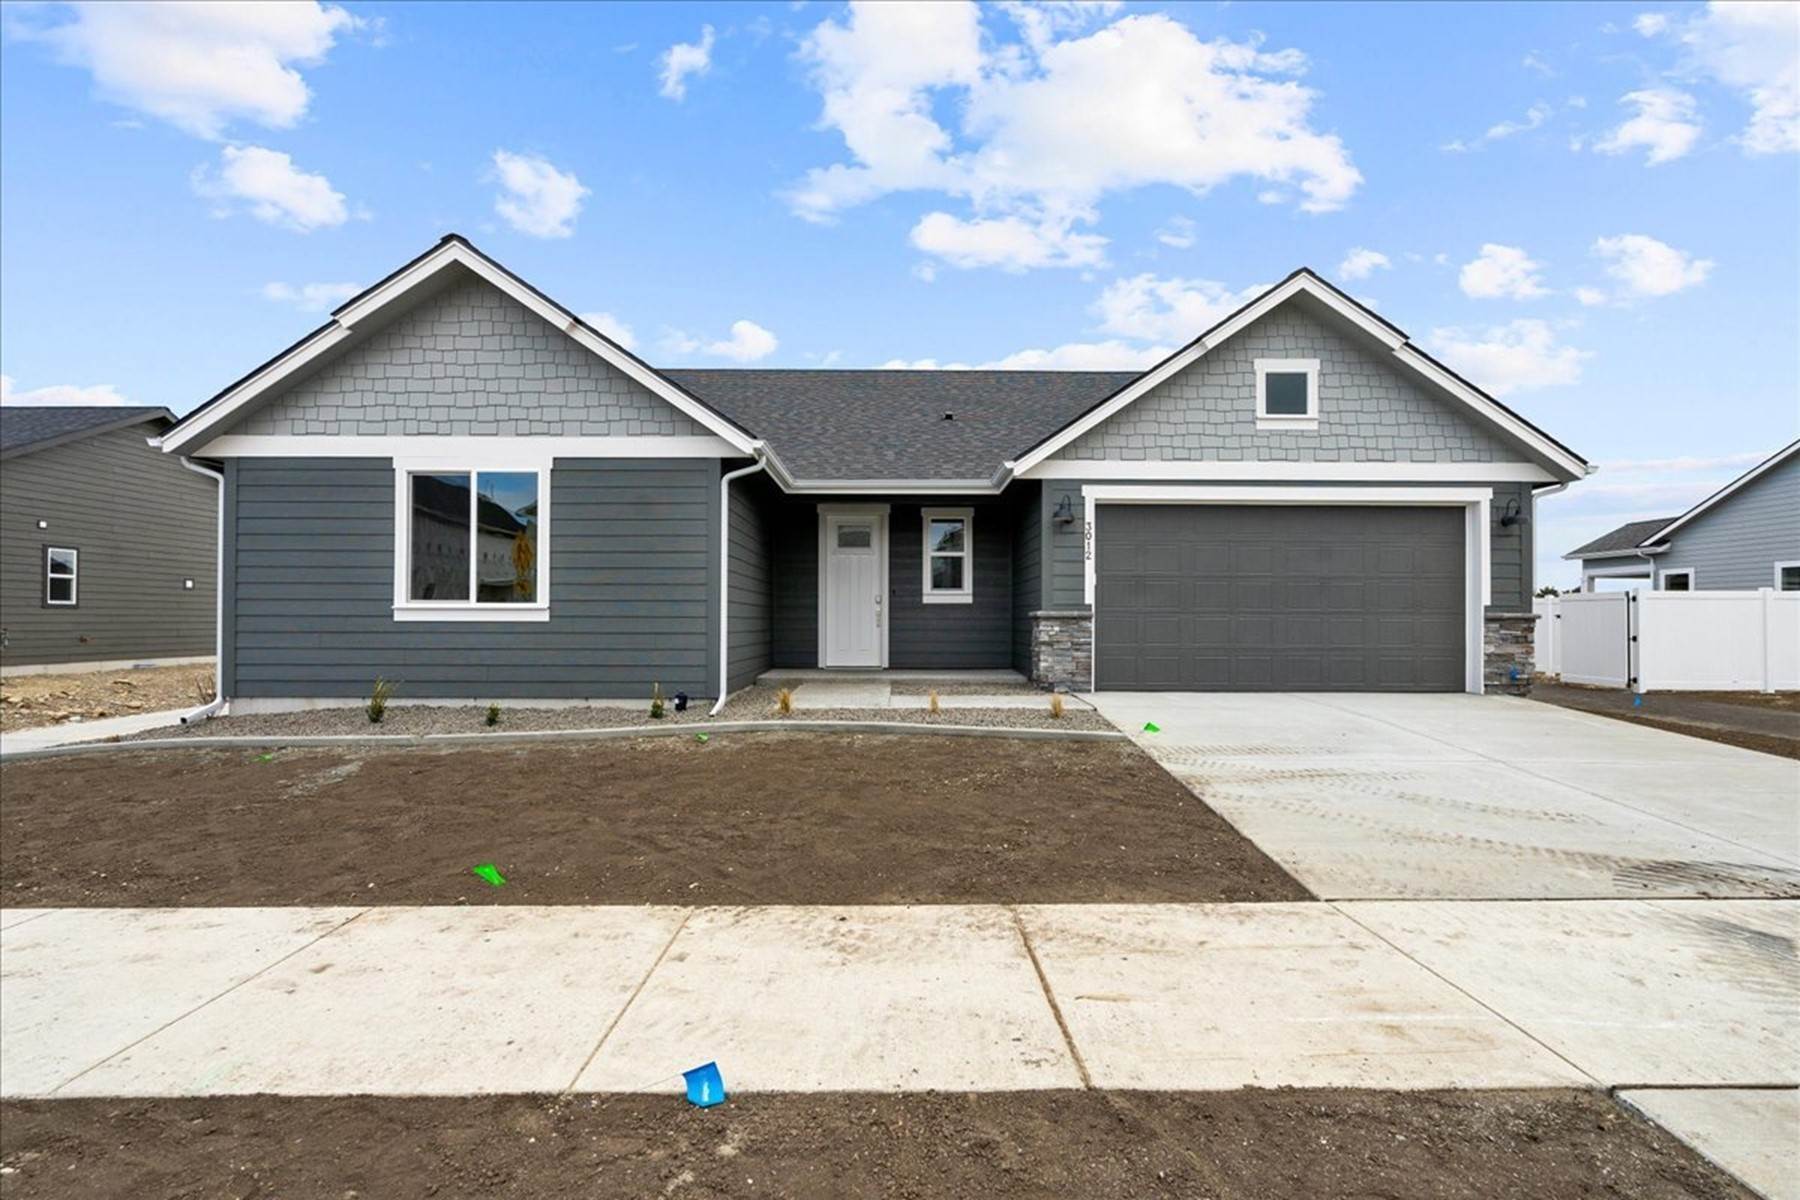 Single Family Homes for Sale at The Denali w/Add'l Detatched Garage 3012 N Andromeda St Post Falls, Idaho 83854 United States